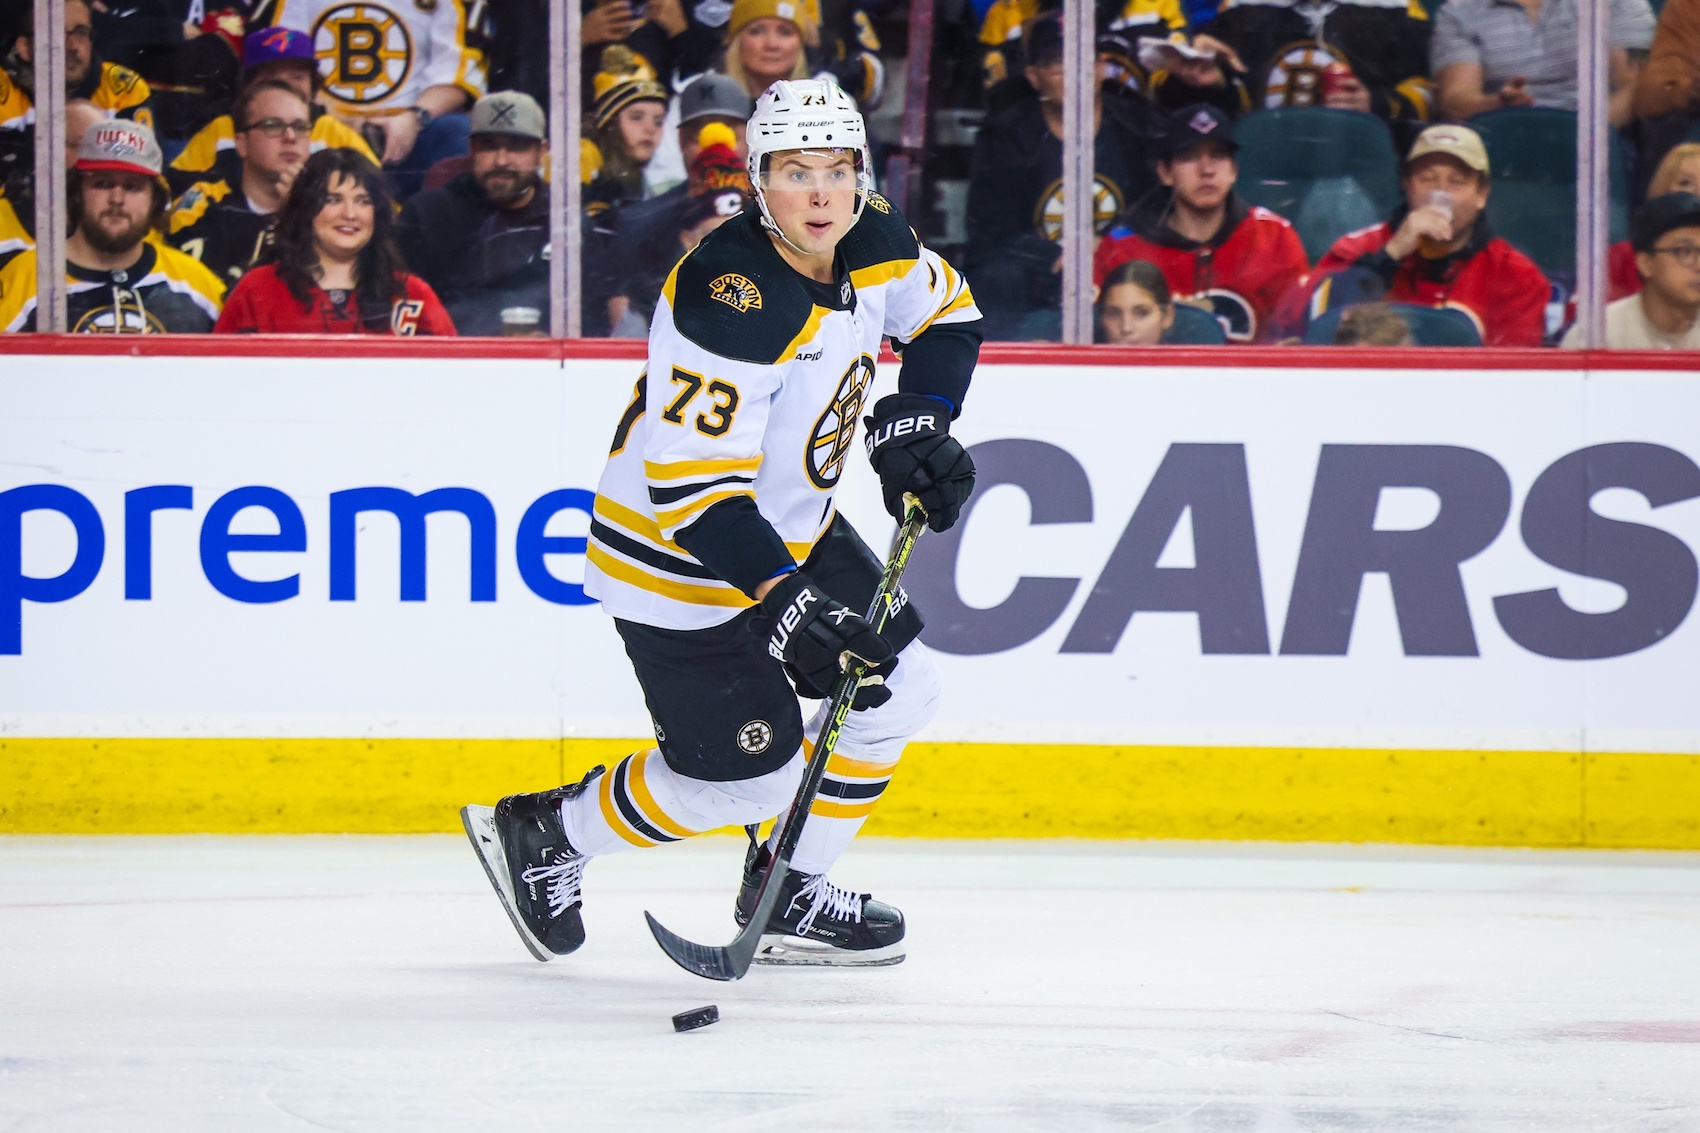 Feb 28, 2023; Calgary, Alberta, CAN; Boston Bruins defenseman Charlie McAvoy (73) skates with the puck against the Calgary Flames during the second period at Scotiabank Saddledome. Mandatory Credit: Sergei Belski-USA TODAY Sports